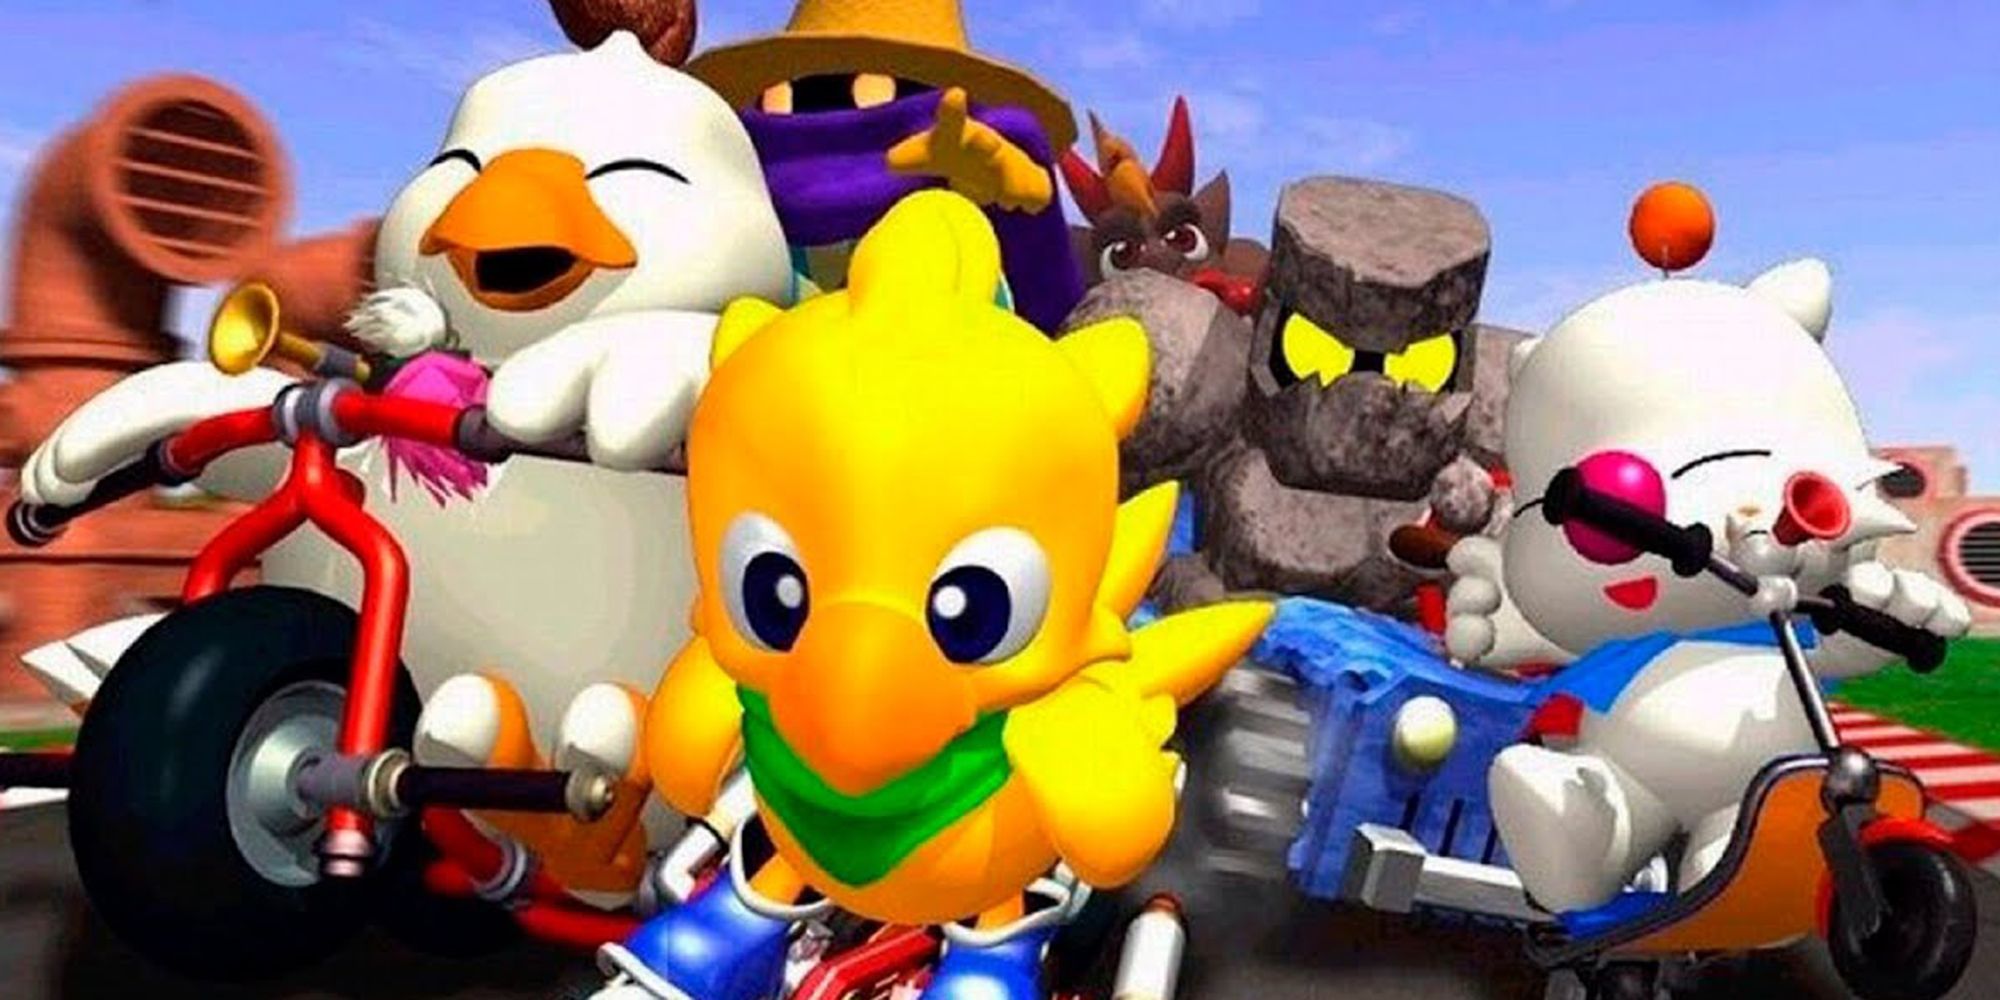 A collection of Final Fantasy characters in Chocobo Racing